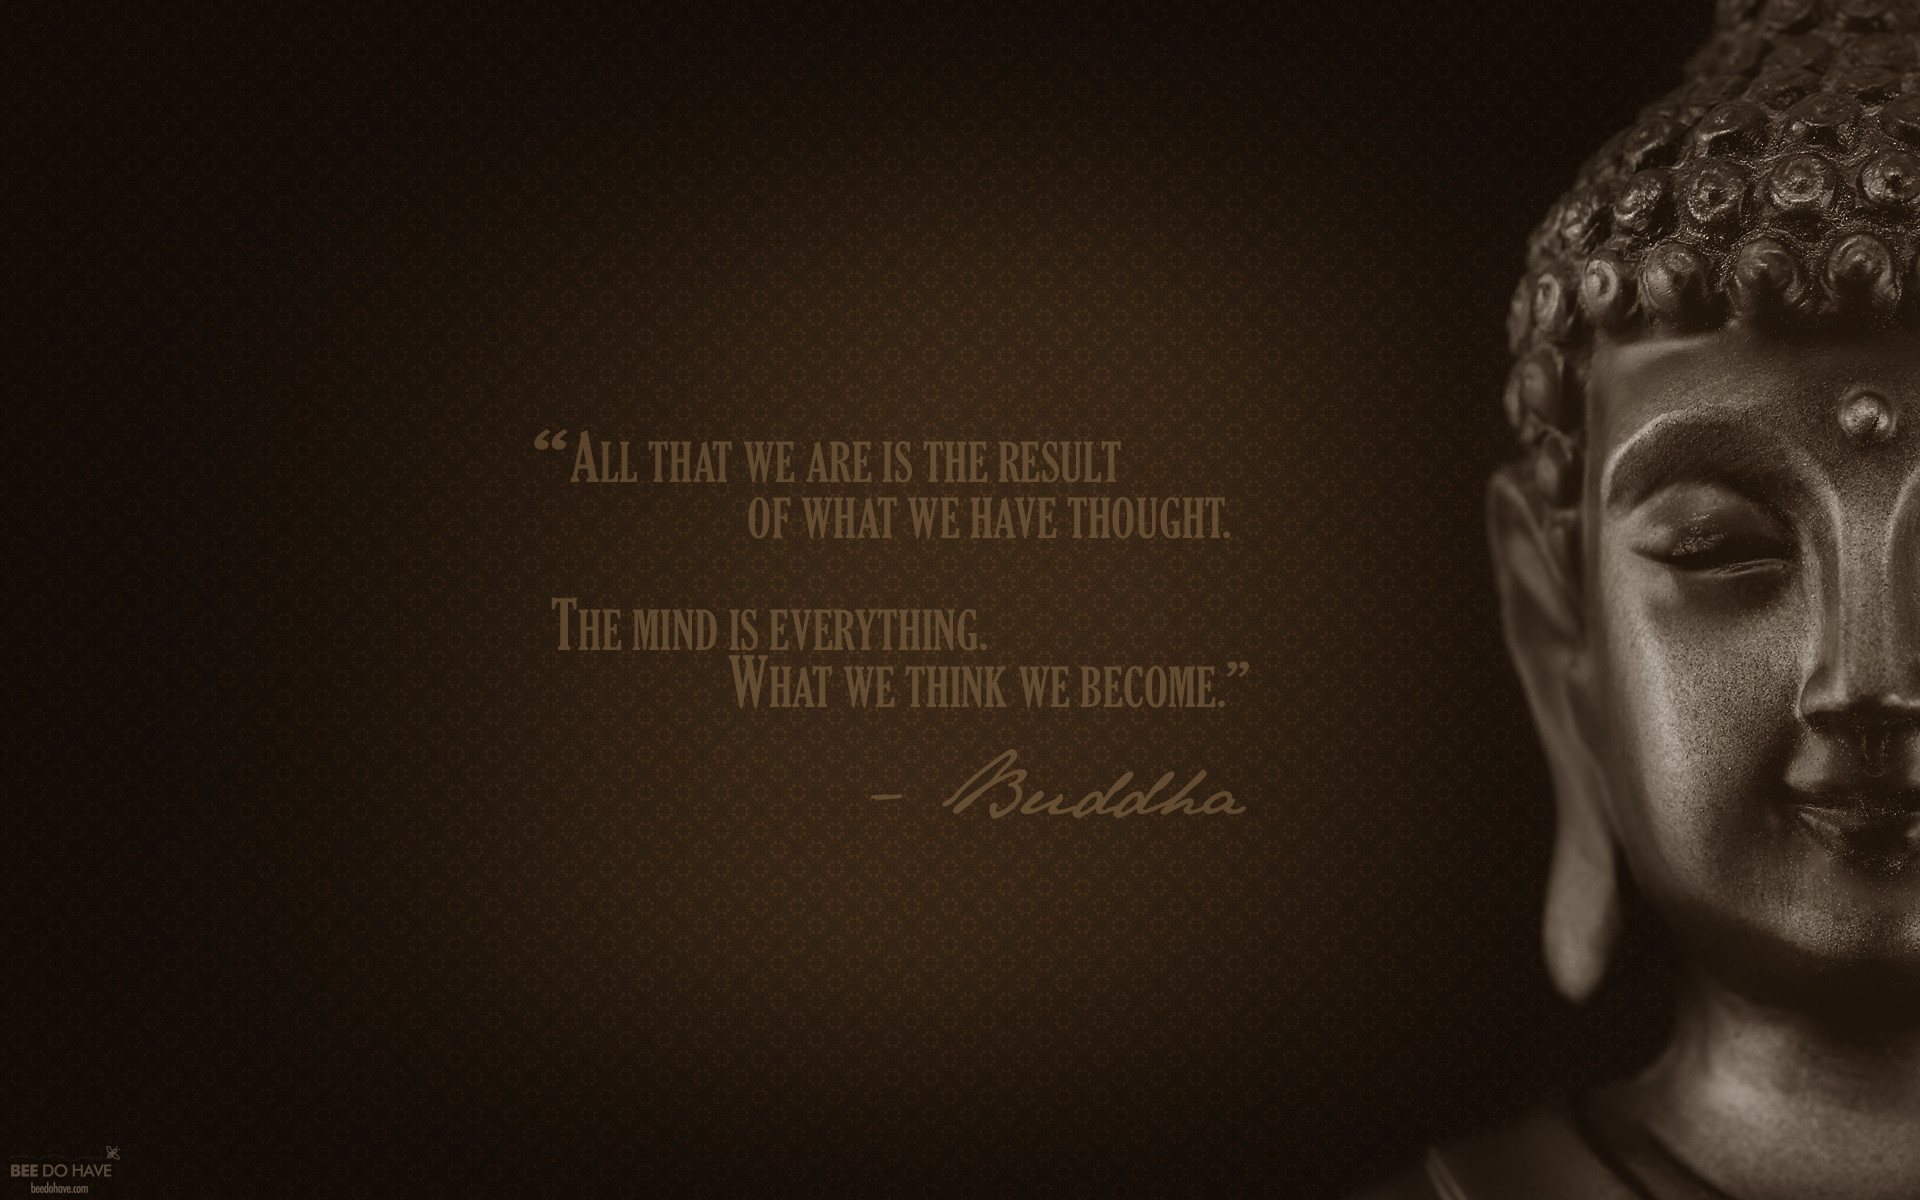 Free Download 19 Buddha Quotes Wallpapers HD